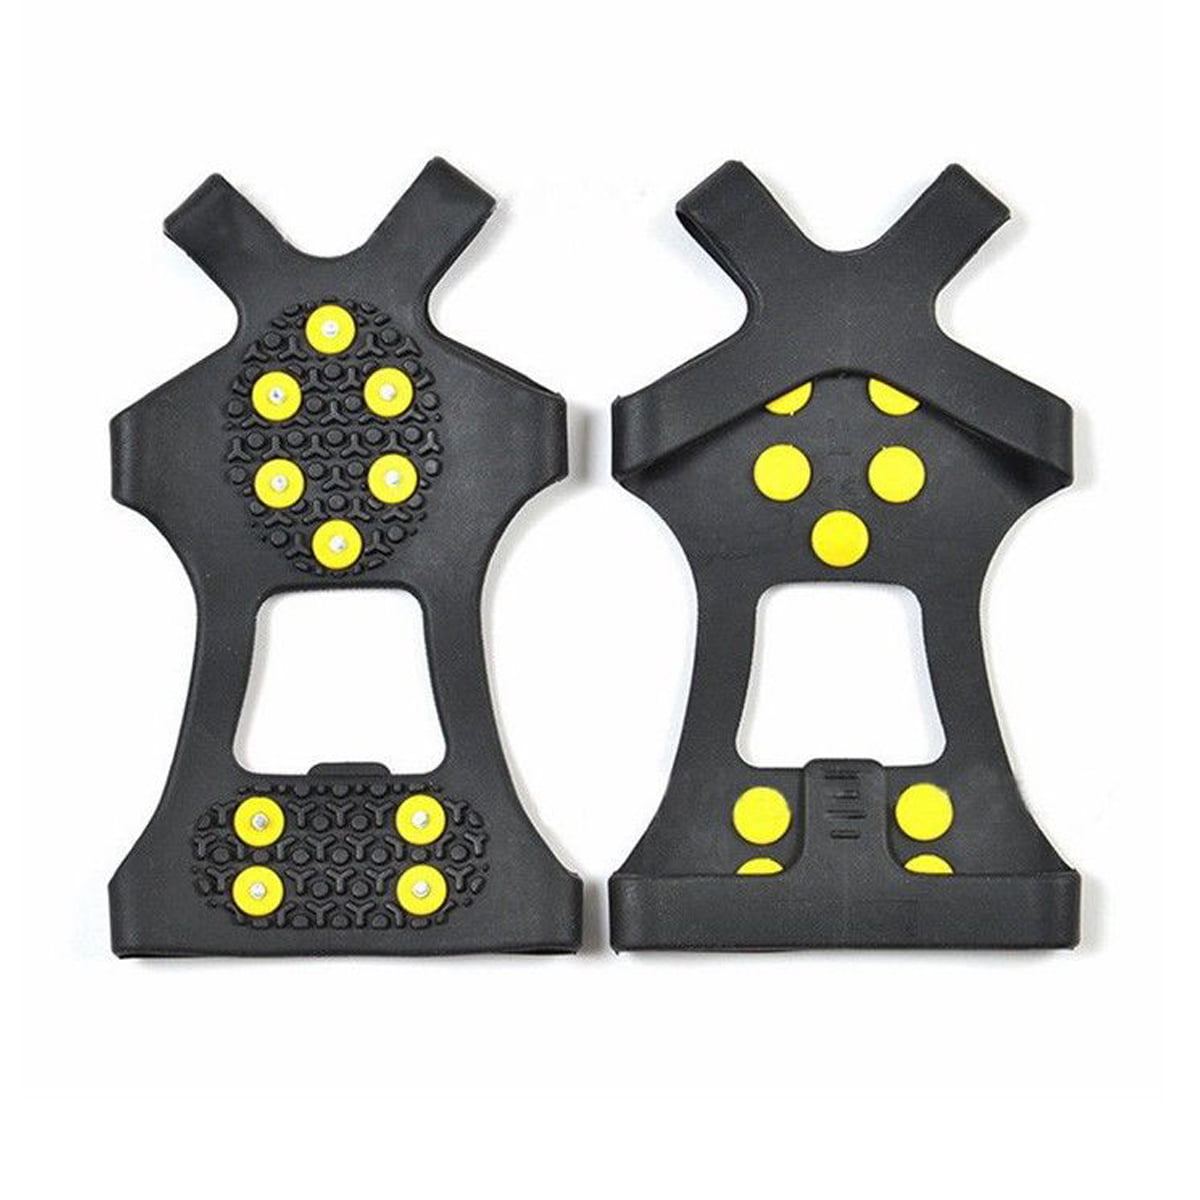 ANTI SLIP ICE GRIPPERS FOR BOOTS SHOES GRIPS OVERSHOE MEDIUM 